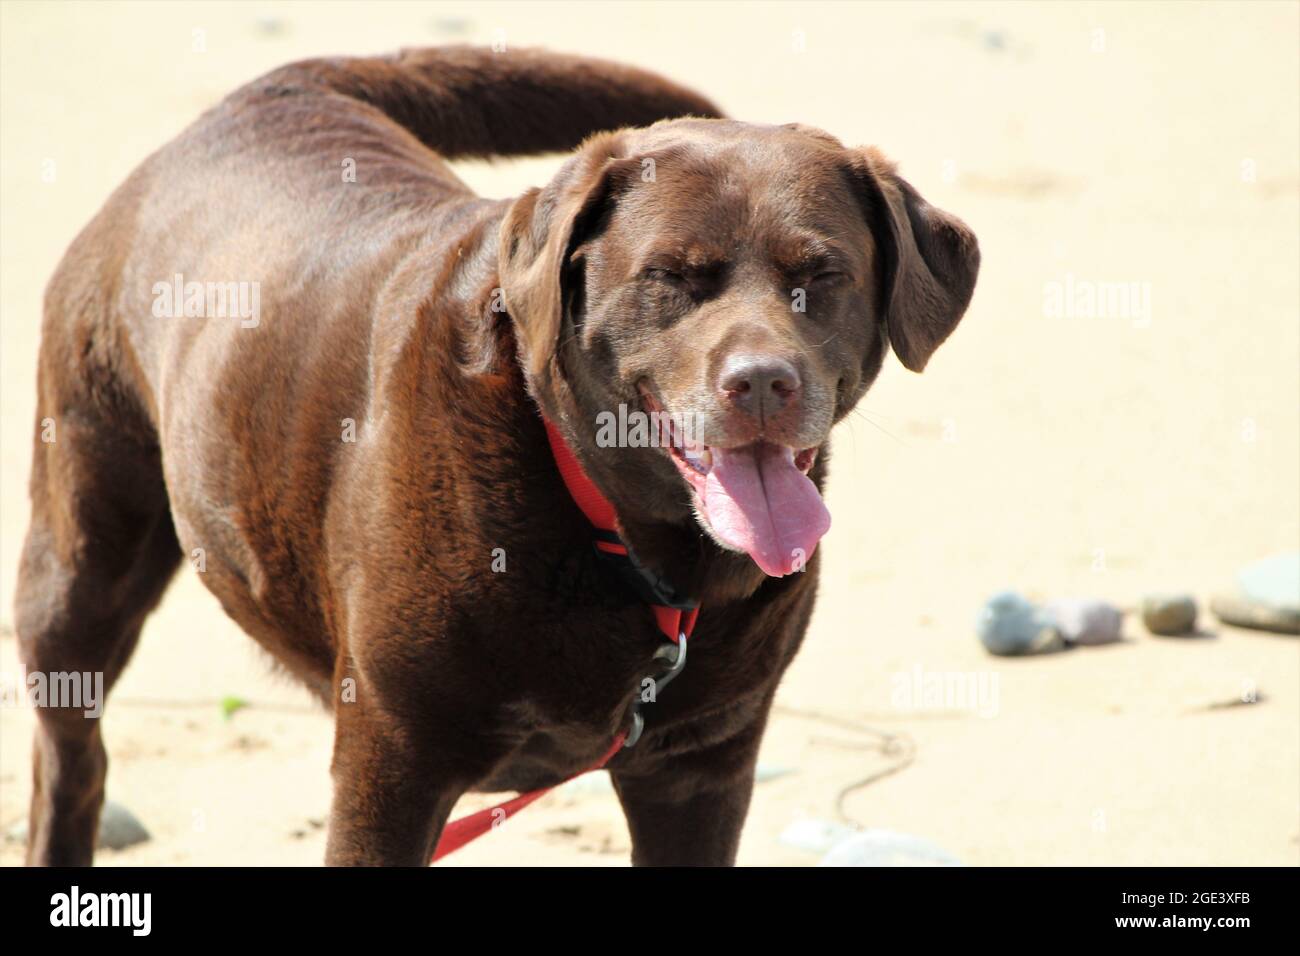 Chocolate Labrador standing on the sand at a beach. Stock Photo